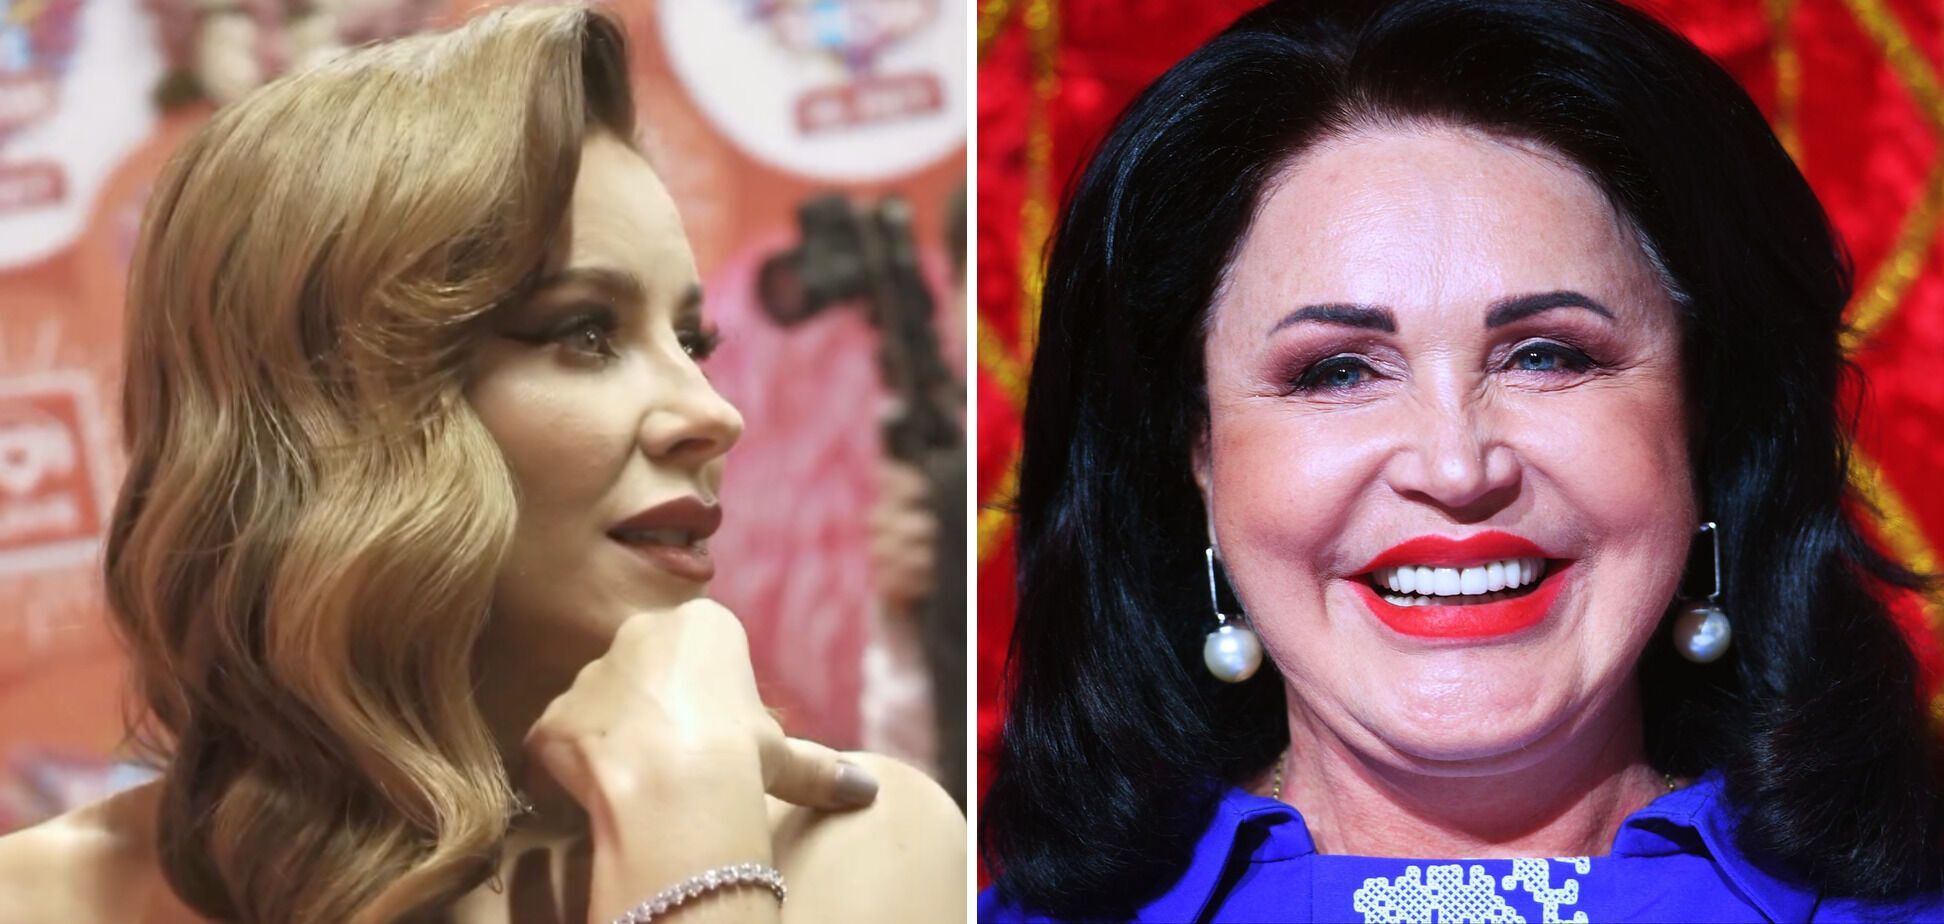 The ''Russian peace'' is getting old: 45-year-old Ani Lorak compared to 73-year-old Nadiia Babkina